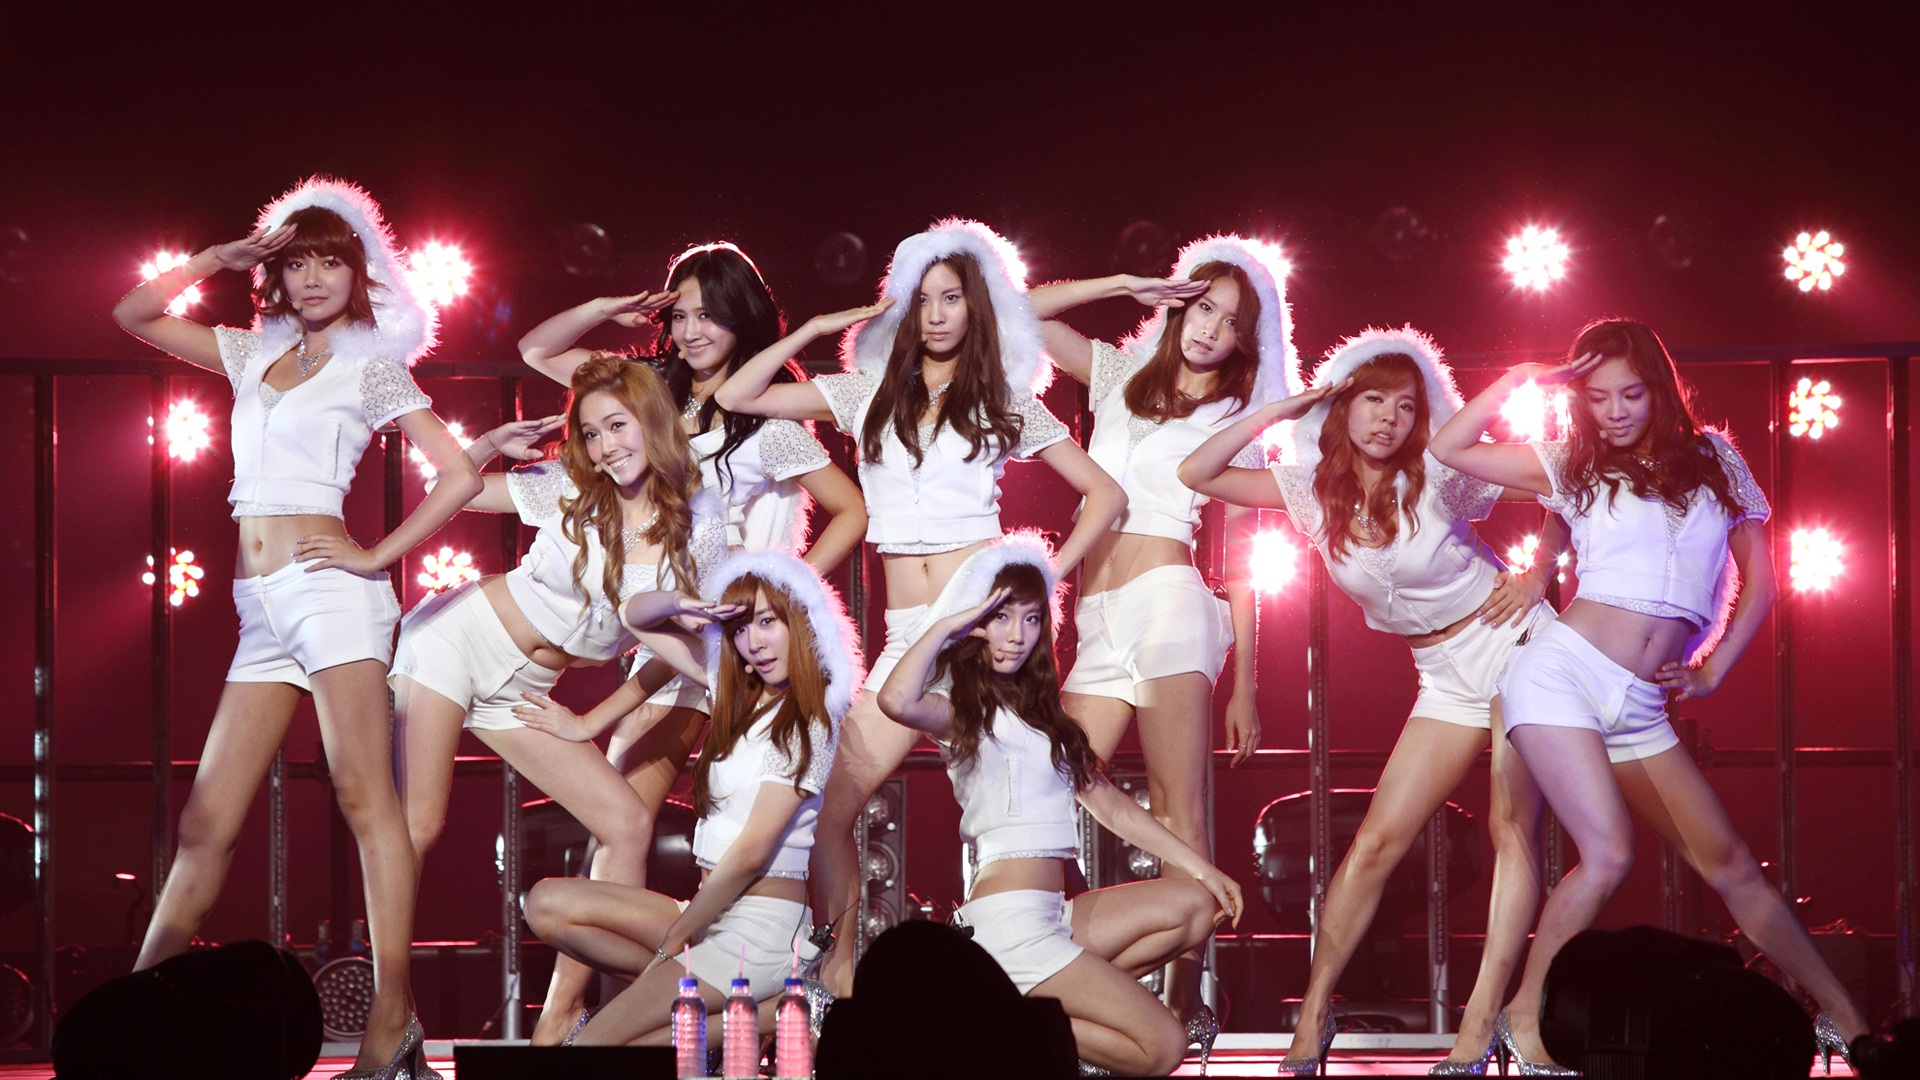 Girls Generation latest HD wallpapers collection #24 - 1920x1080